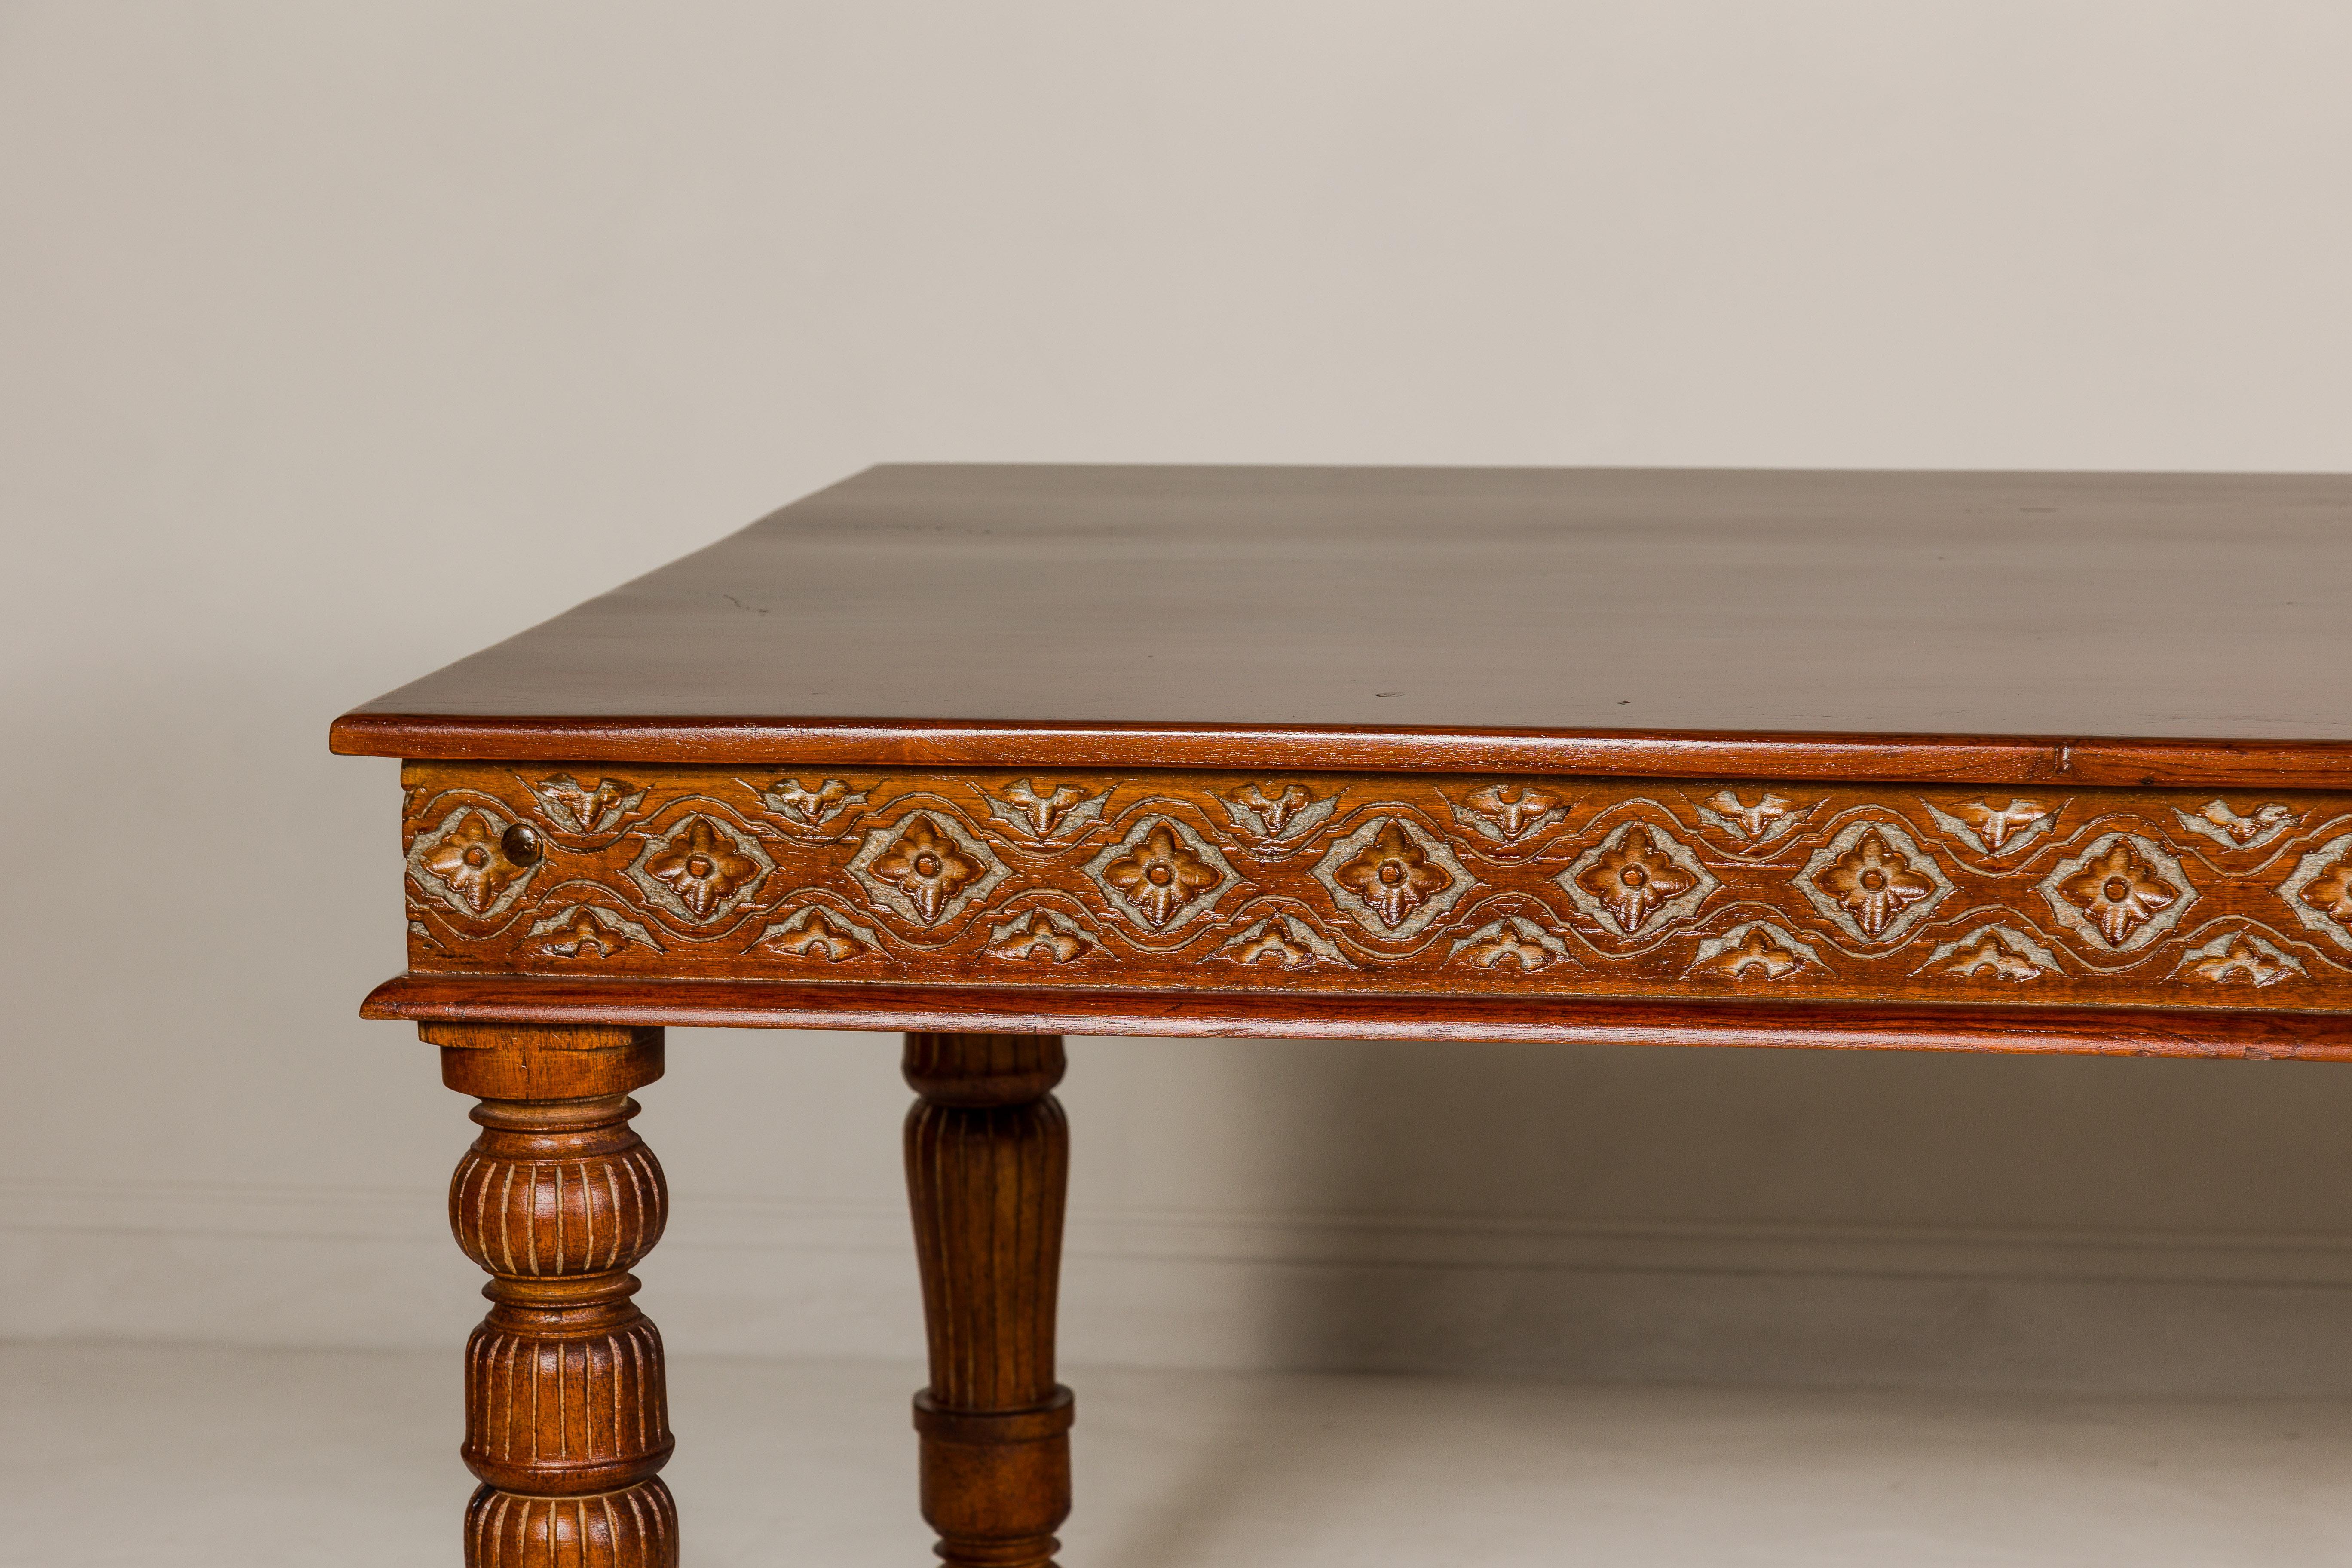 Large Dining Room Table with Carved Apron, Floral Motifs and Turned Legs In Good Condition For Sale In Yonkers, NY